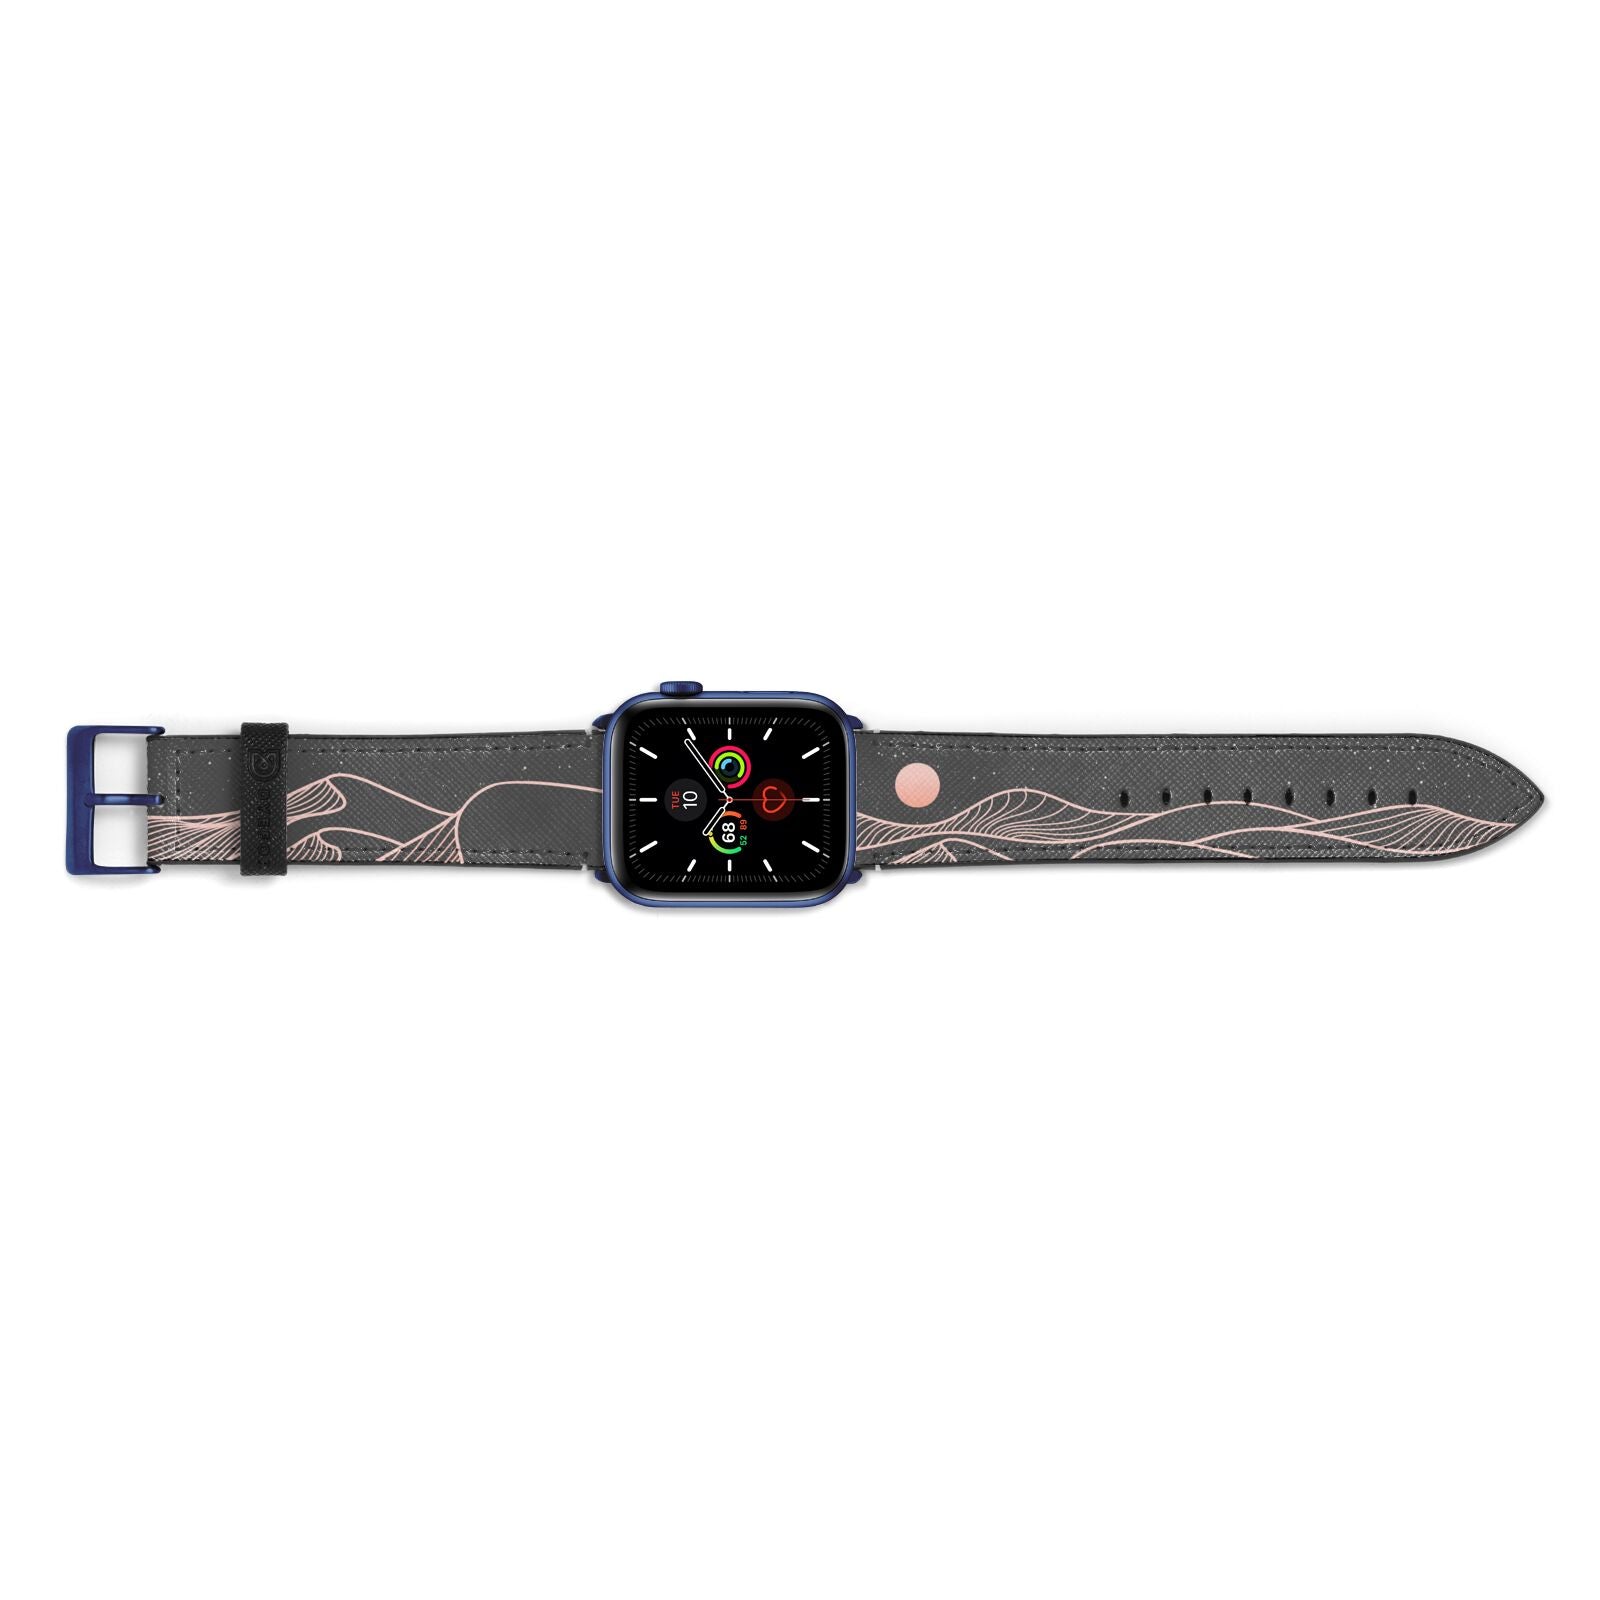 Abstract Sunset Apple Watch Strap Landscape Image Blue Hardware